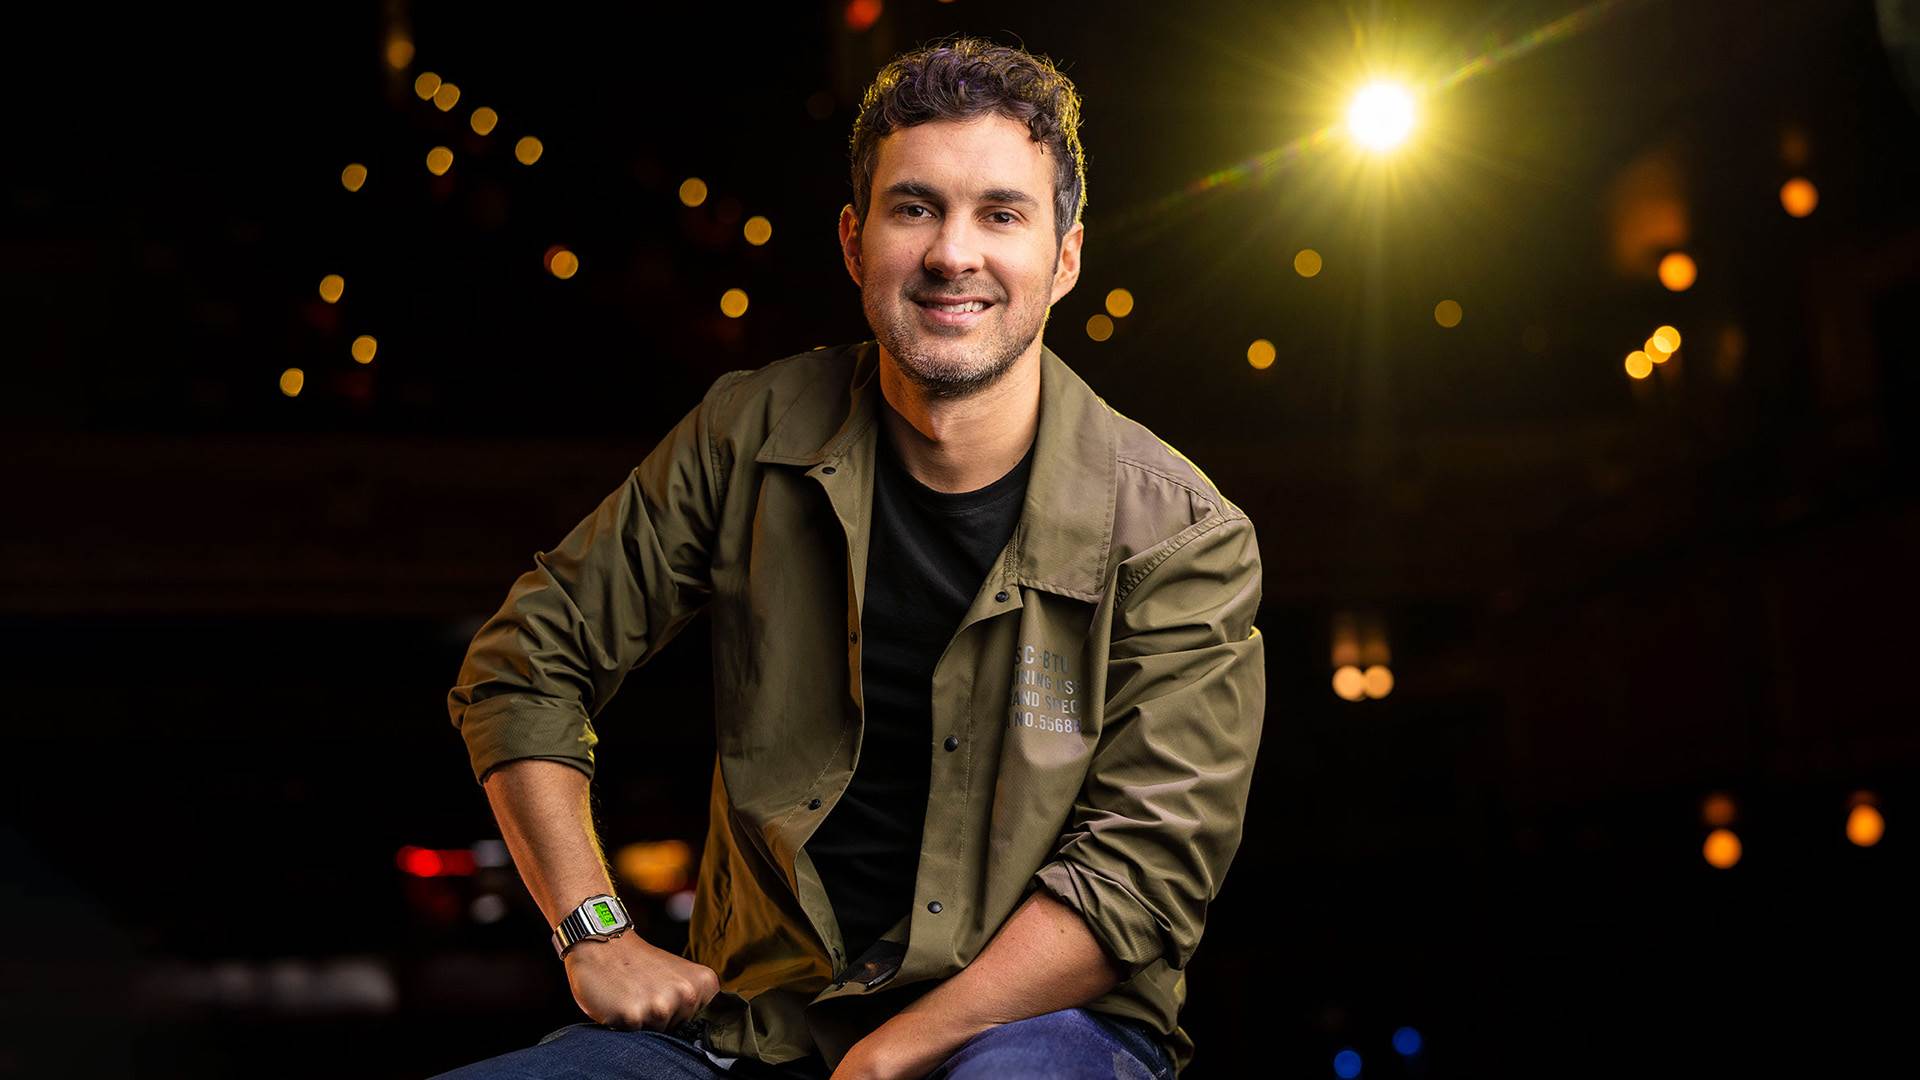 A young caucasian man with short brown hair in a black shirt and olive green button up shirt over sitting and smiling to the camera. Stage lights shine behind him.